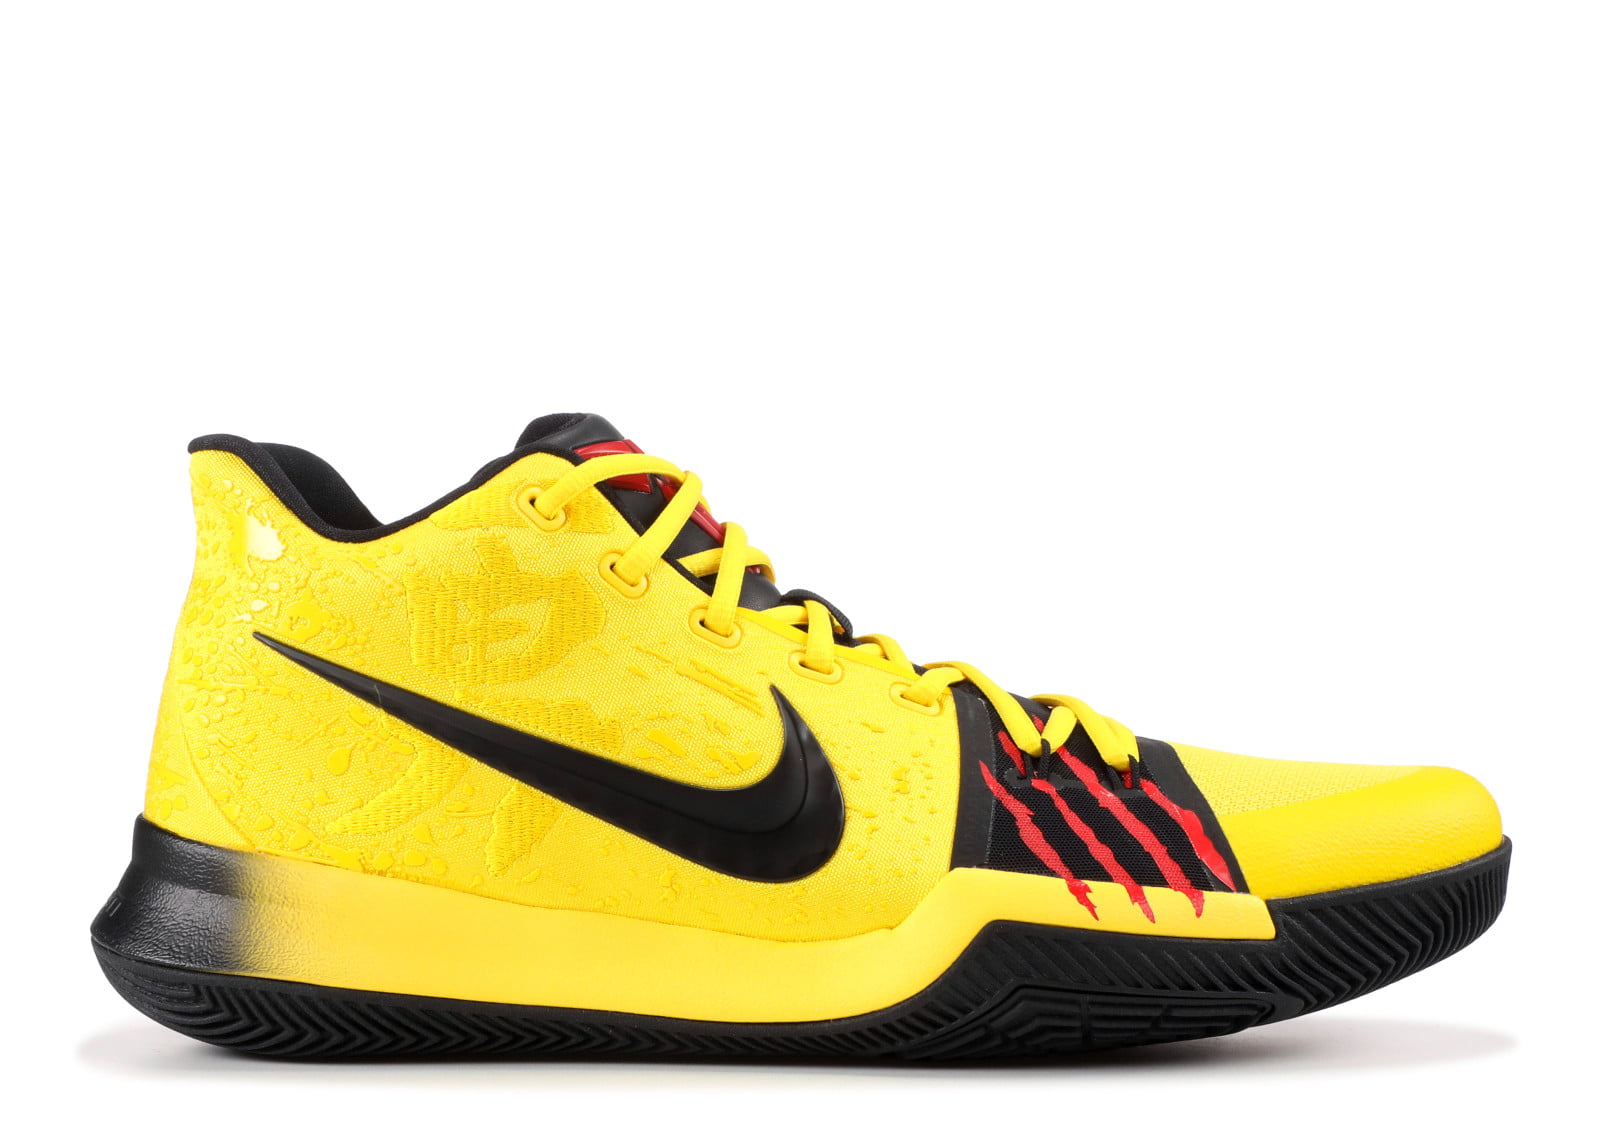 kyrie and kobe collab